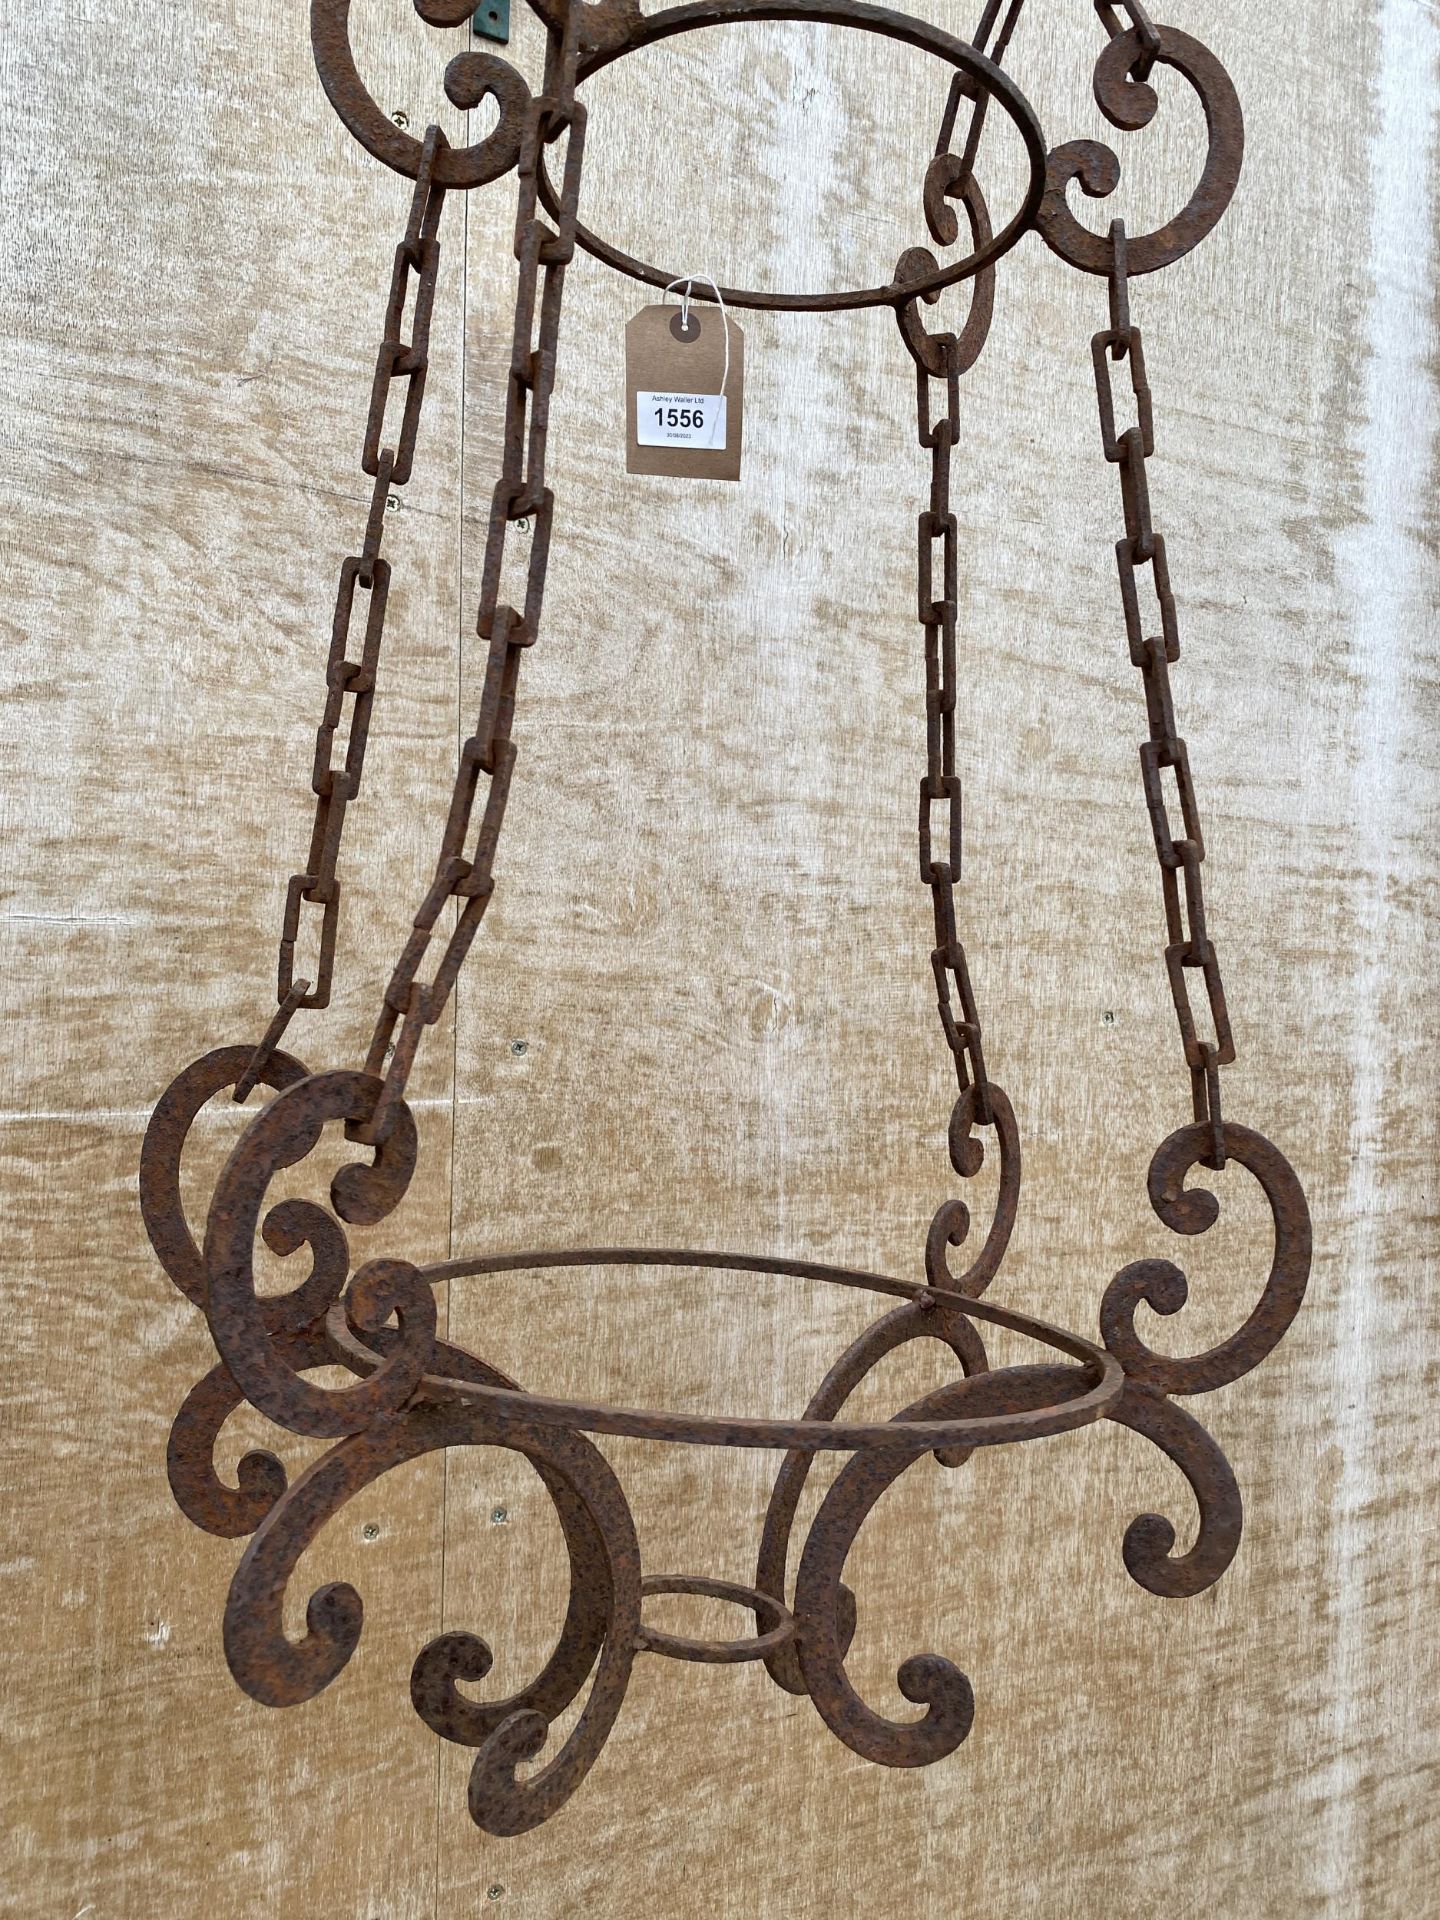 A VINTAGE DECORATIVE WROUGHT IRON HANGING TWO TIER PLANT POT HOLDER - Image 3 of 3